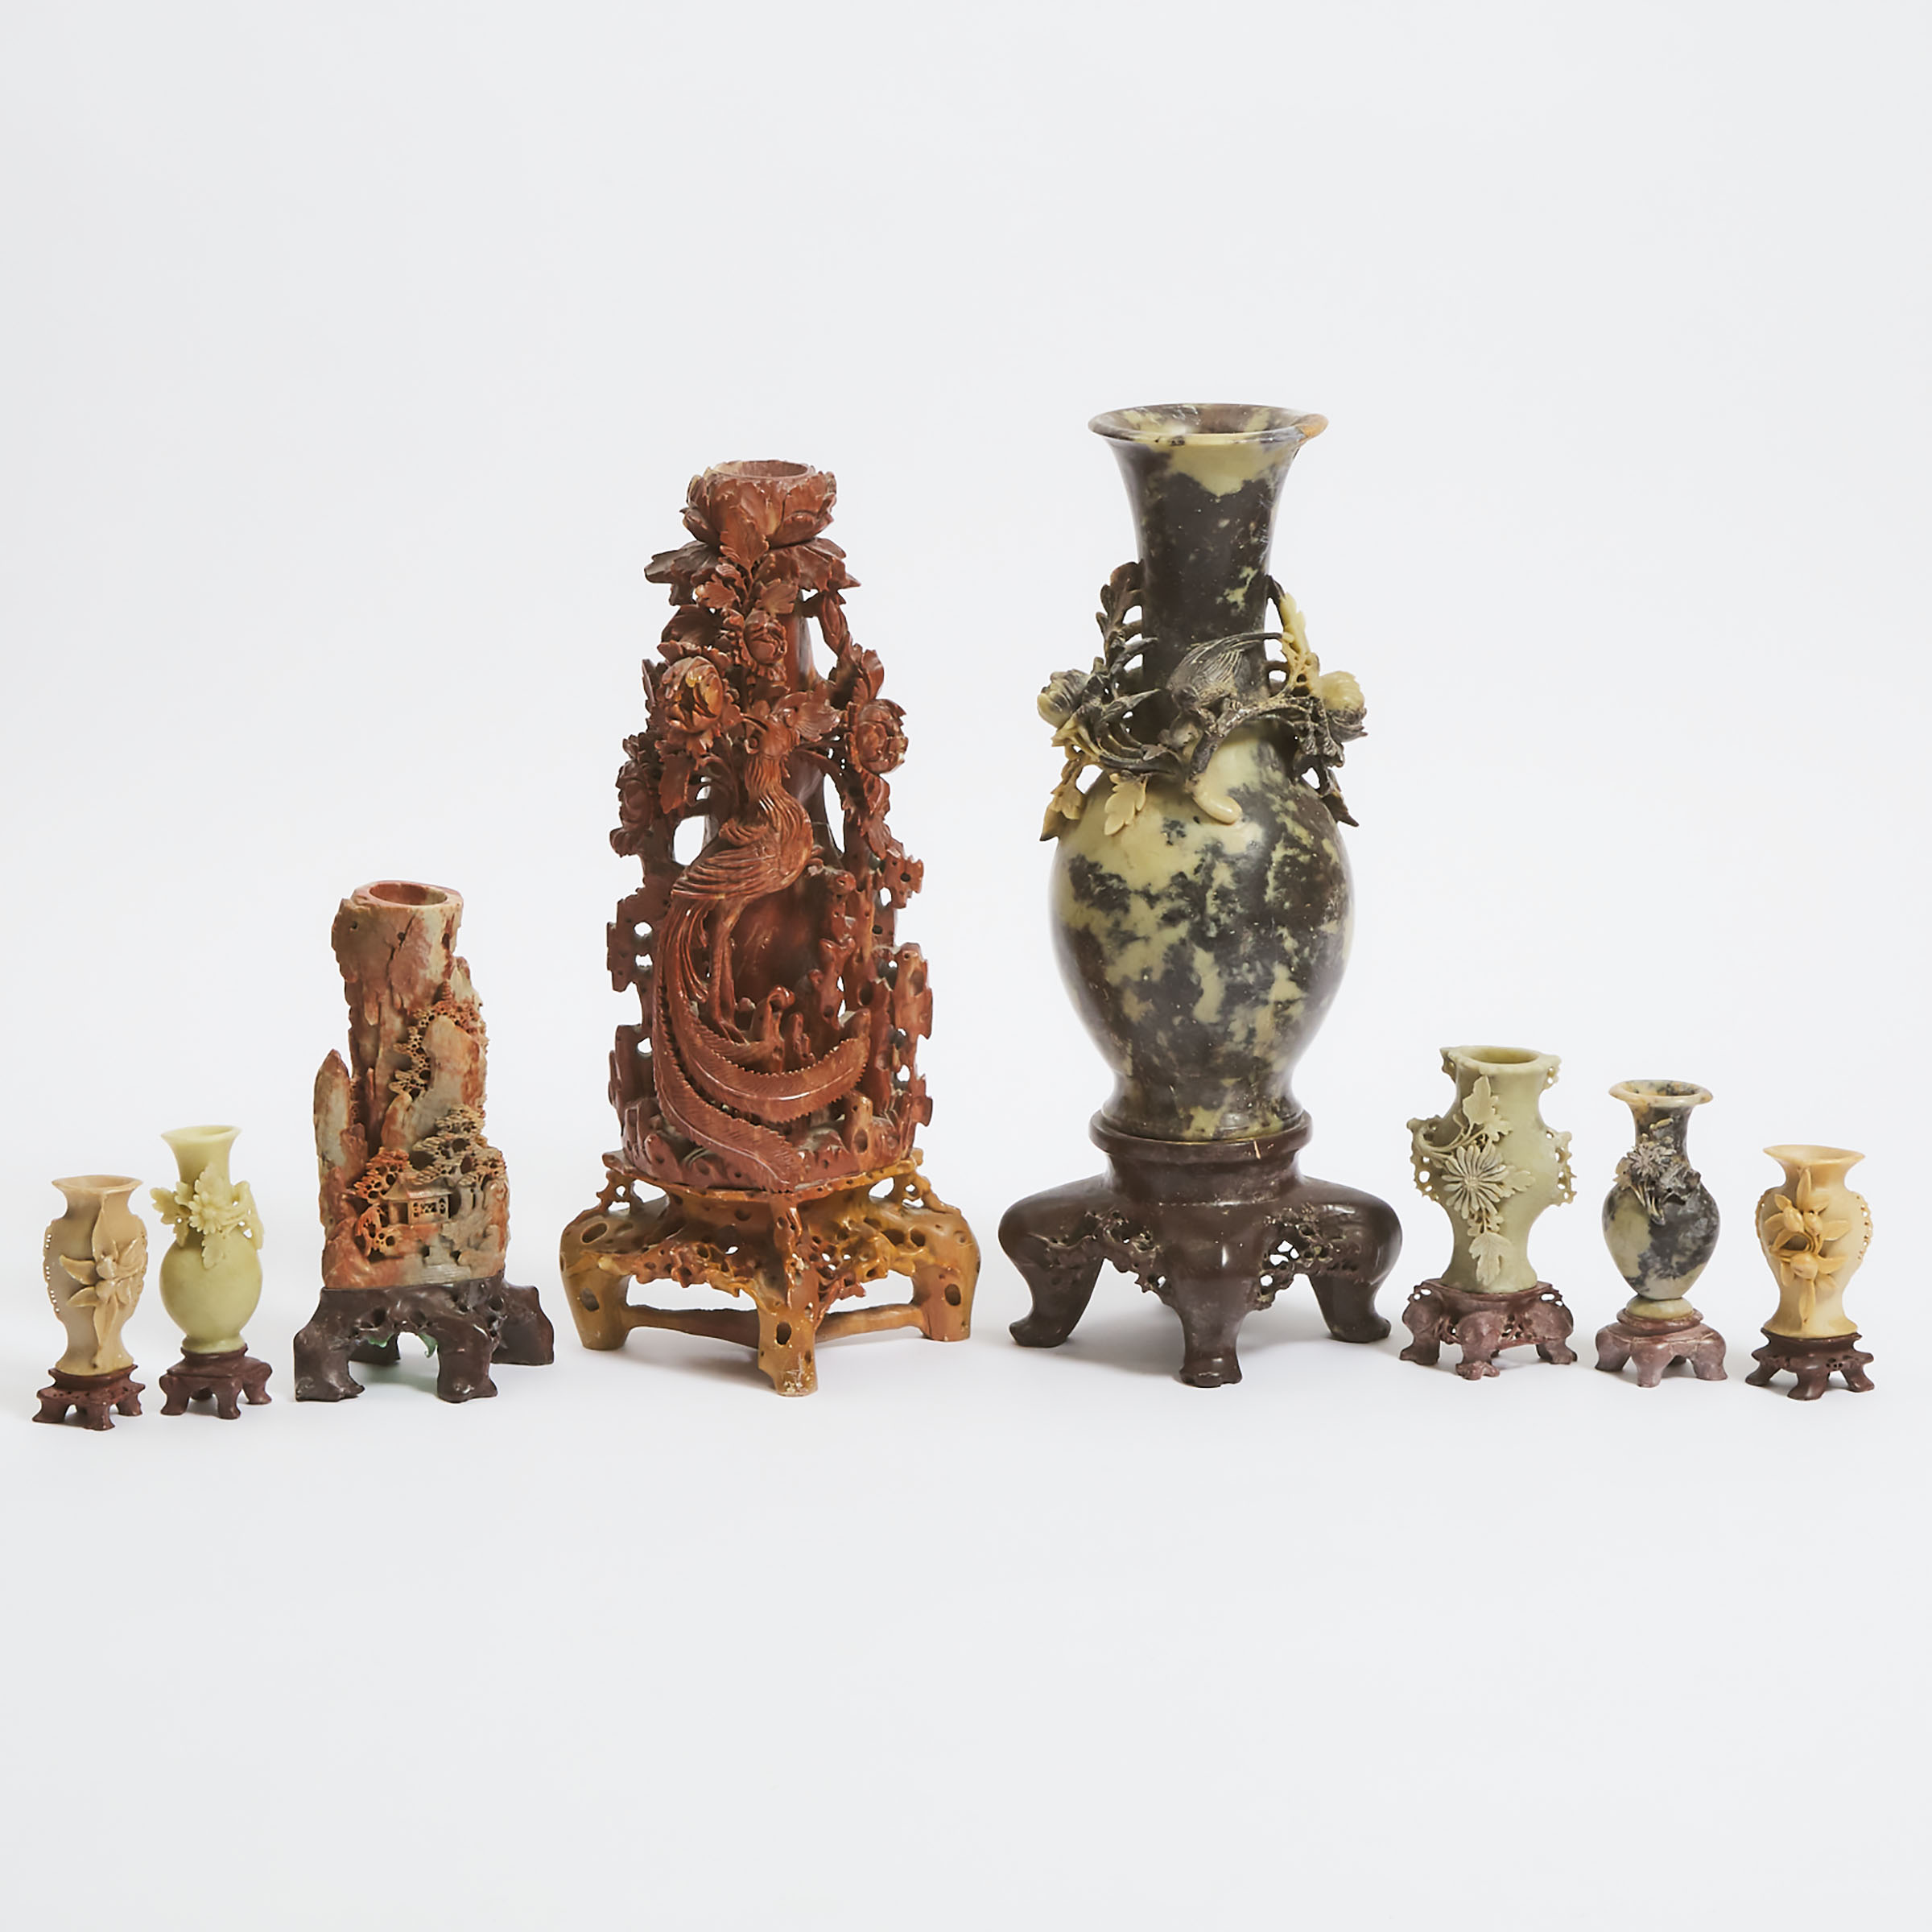 A Group of Eight Chinese Soapstone Carvings, Mid 20th Century